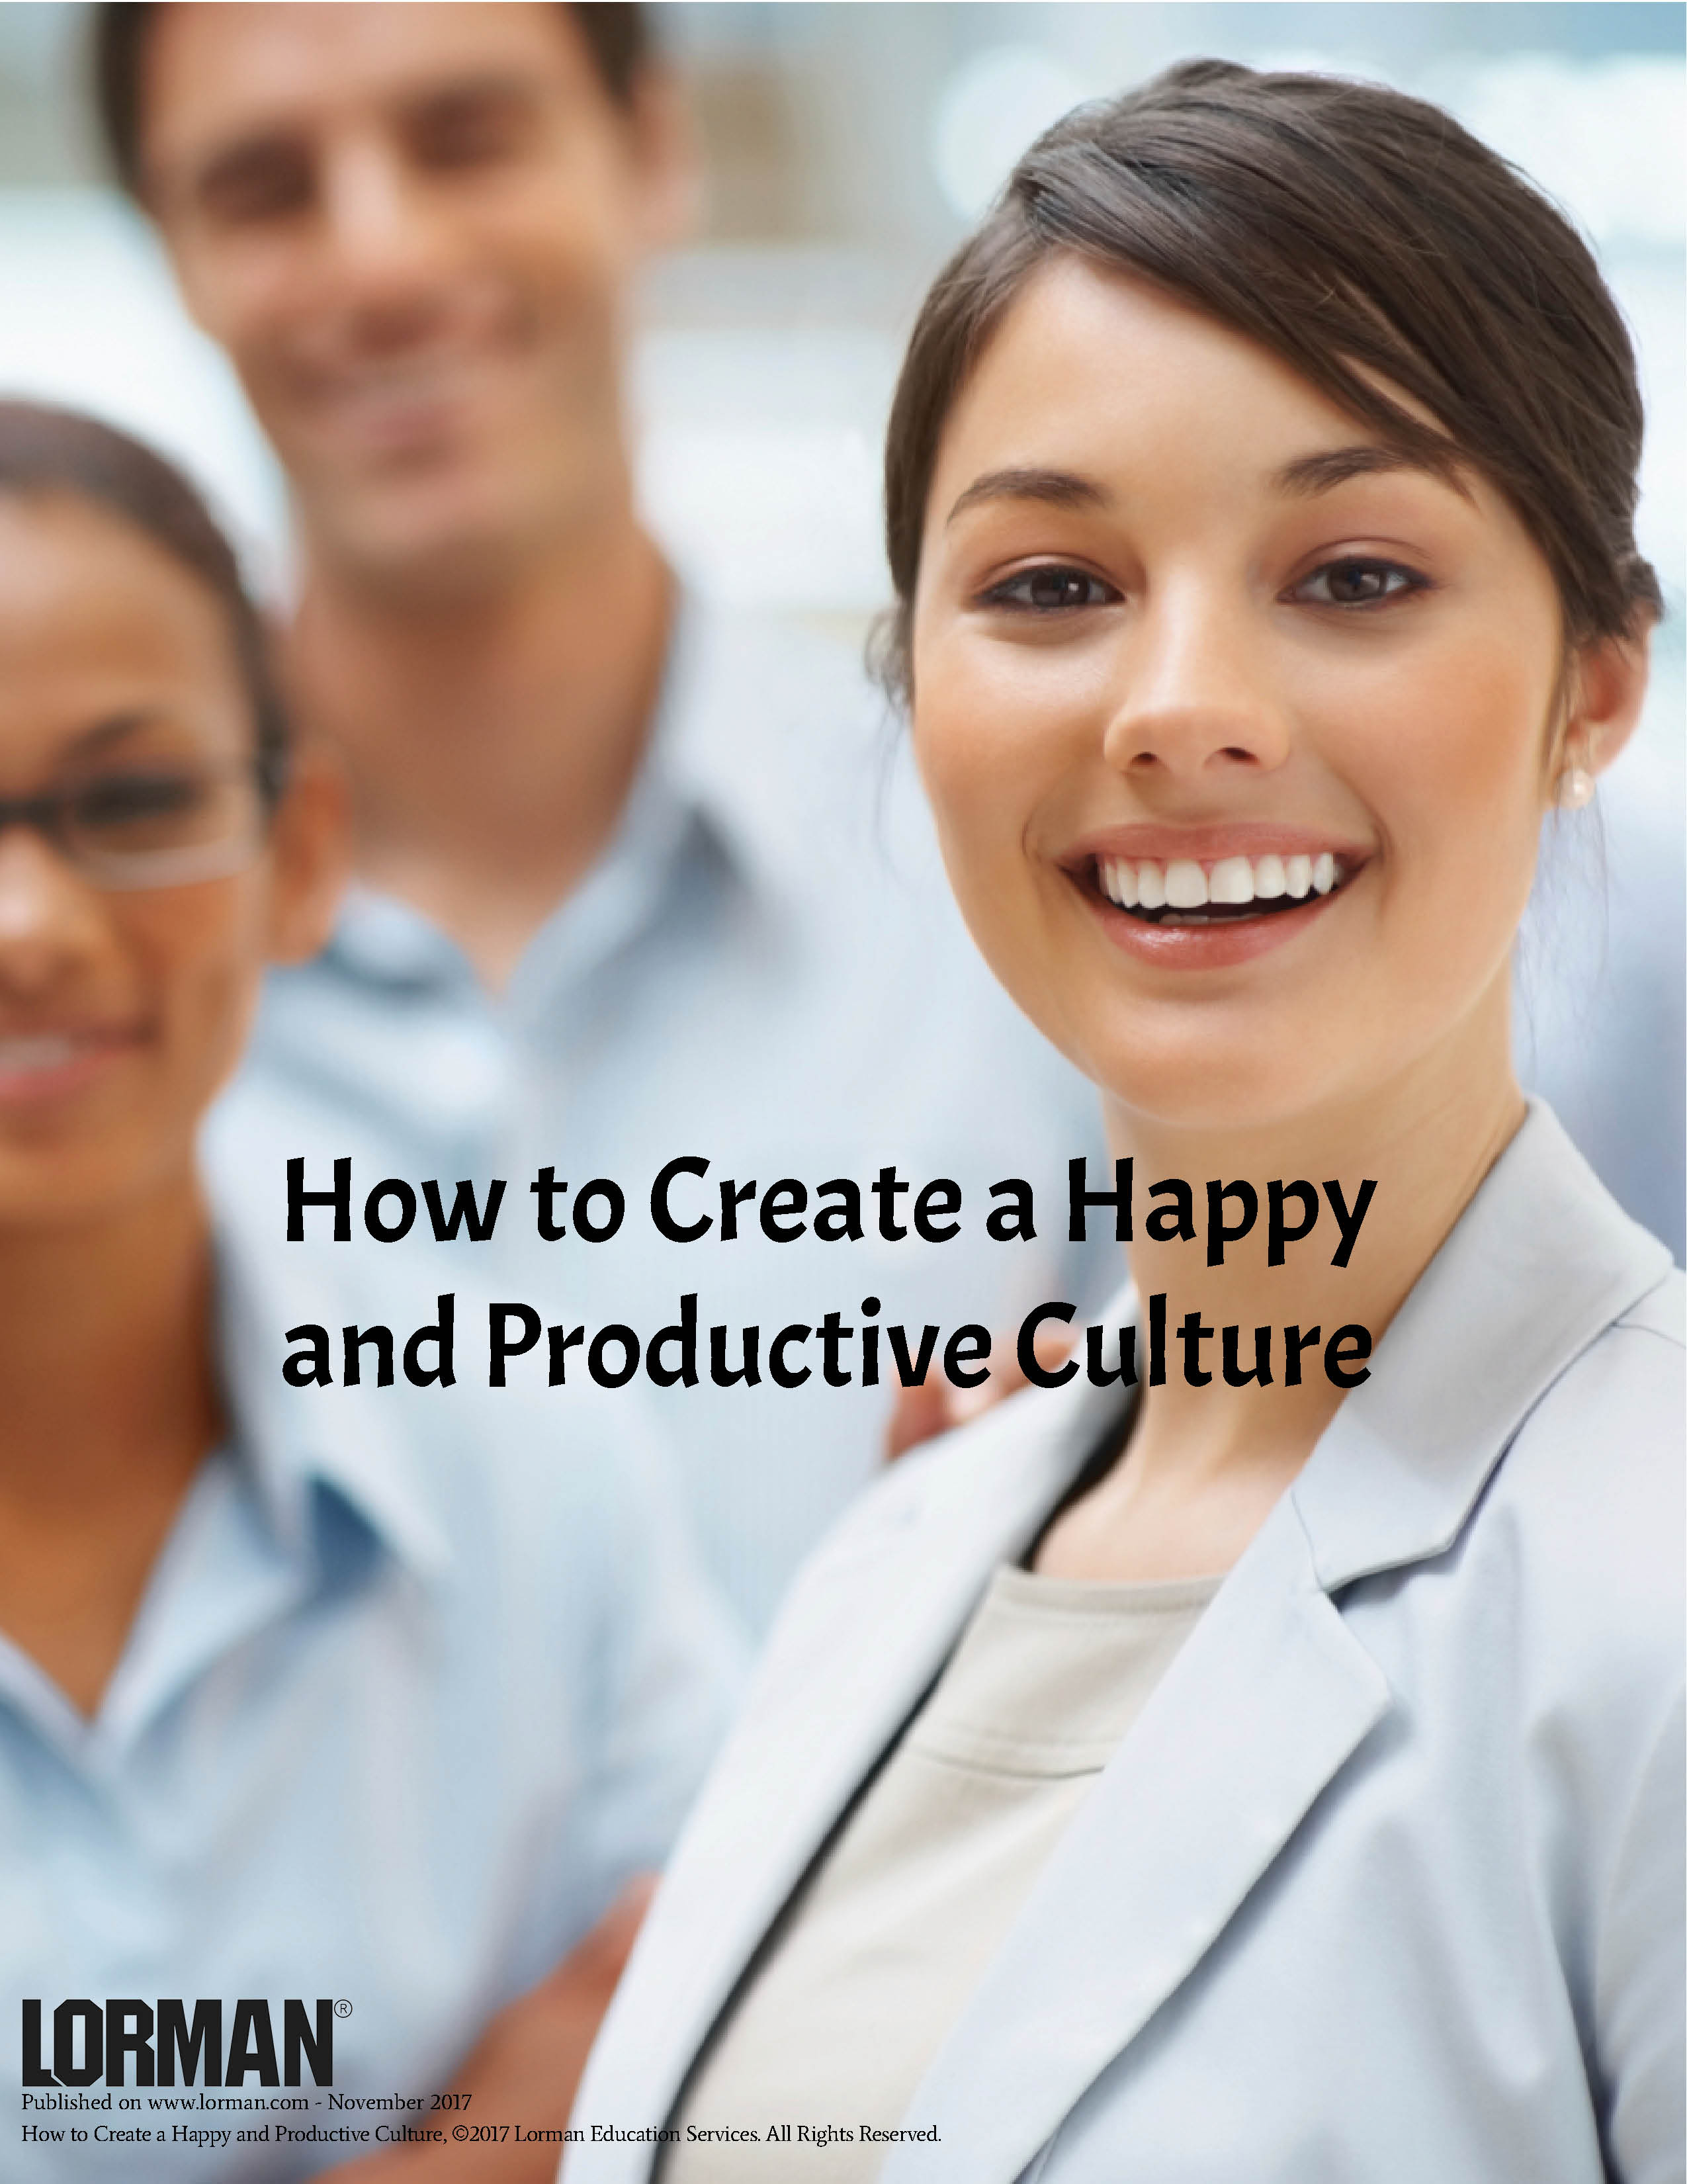 How to Create a Happy and Productive Culture